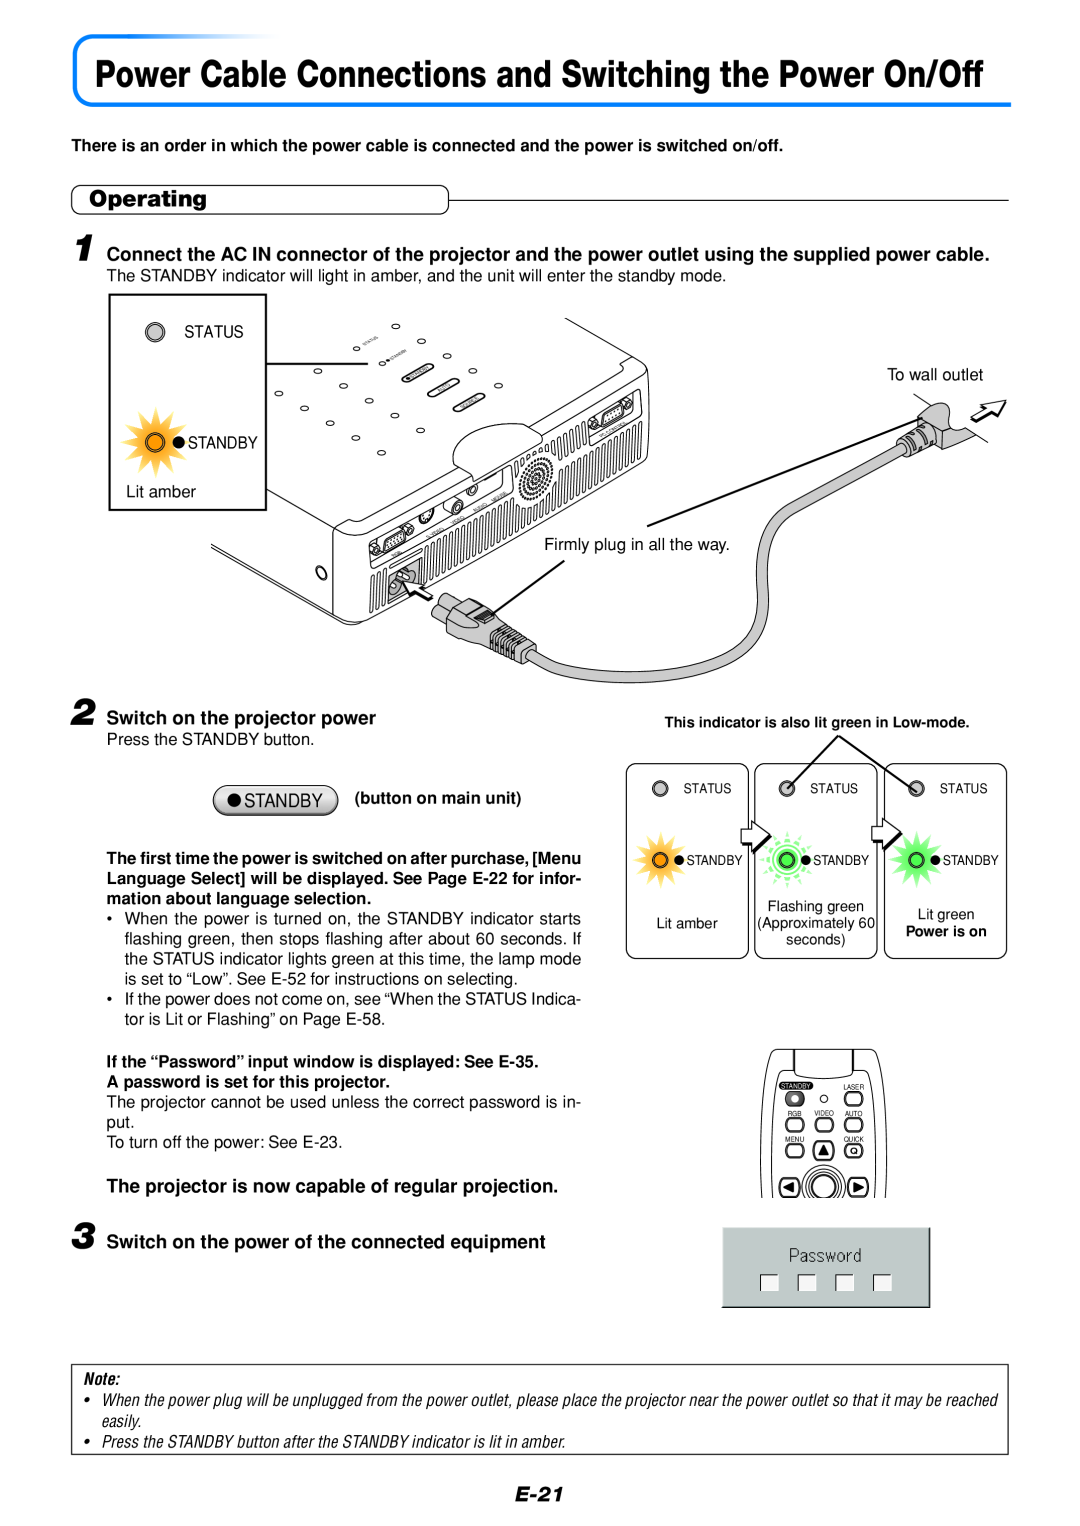 Mitsubishi Electronics DATA PROJECTOR user manual Operating, E-21, Power Cable Connections and Switching the Power On/Off 